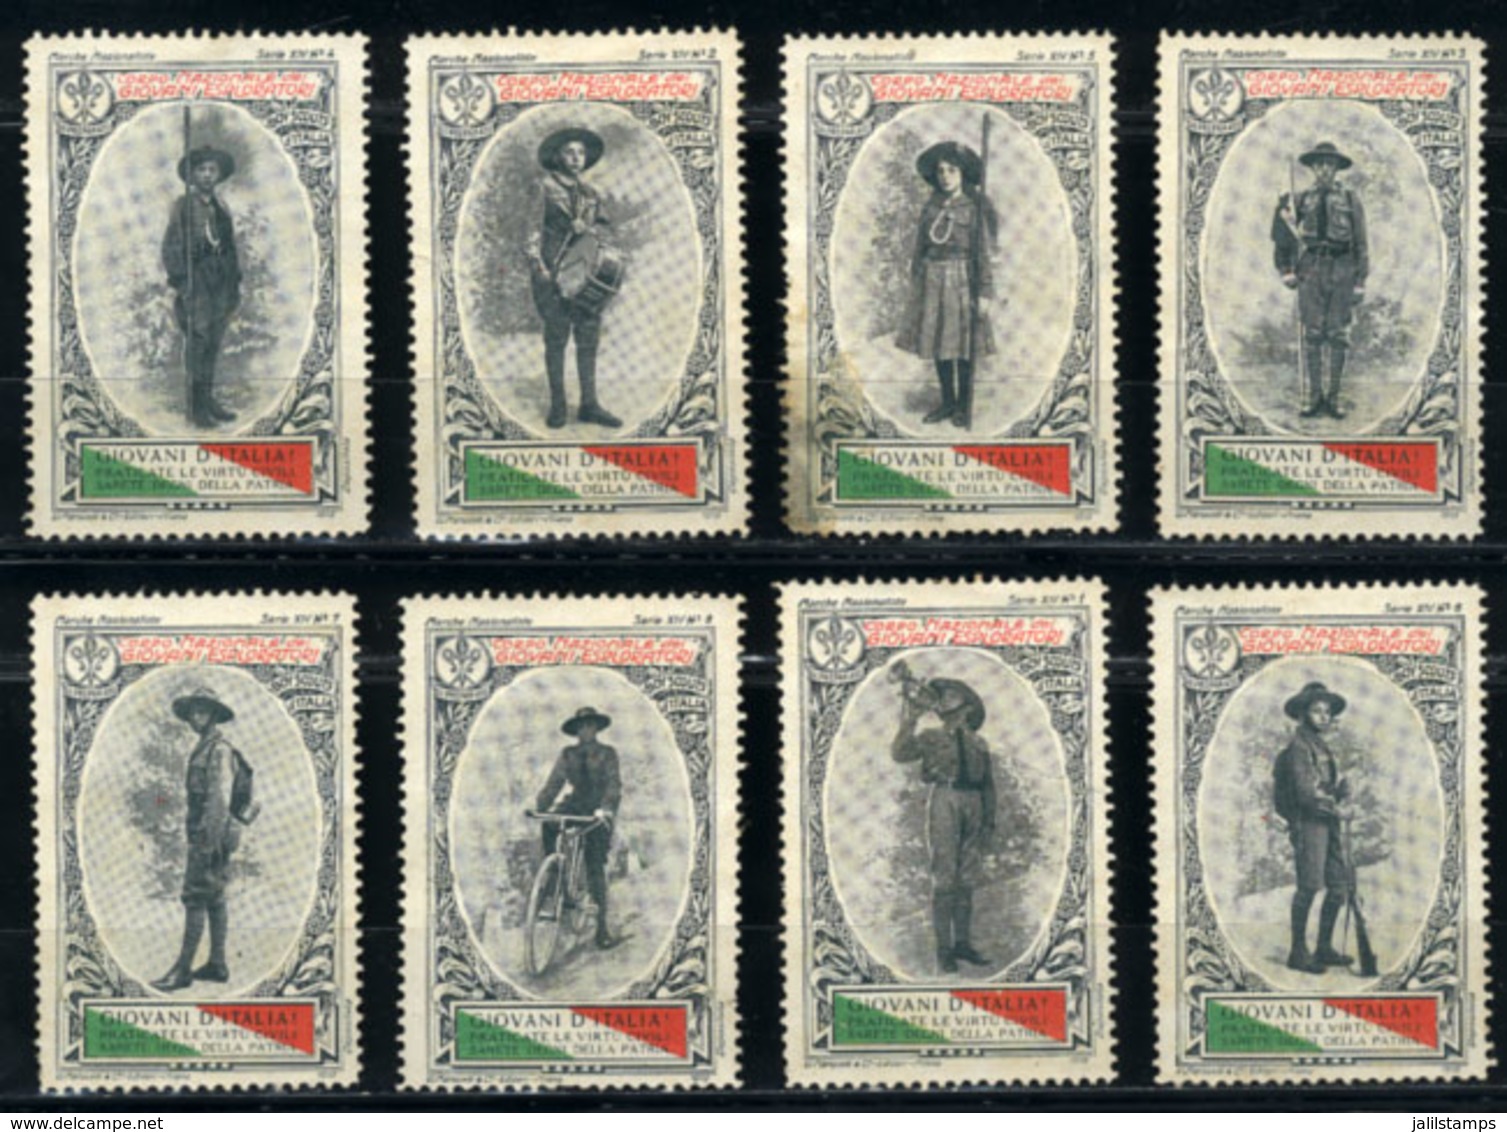 ITALY: 8 Old Cinderellas, Topic SCOUTS, Most Of Fine To VF Quality (some May Have Defects), Very Interesting! - Cinderellas